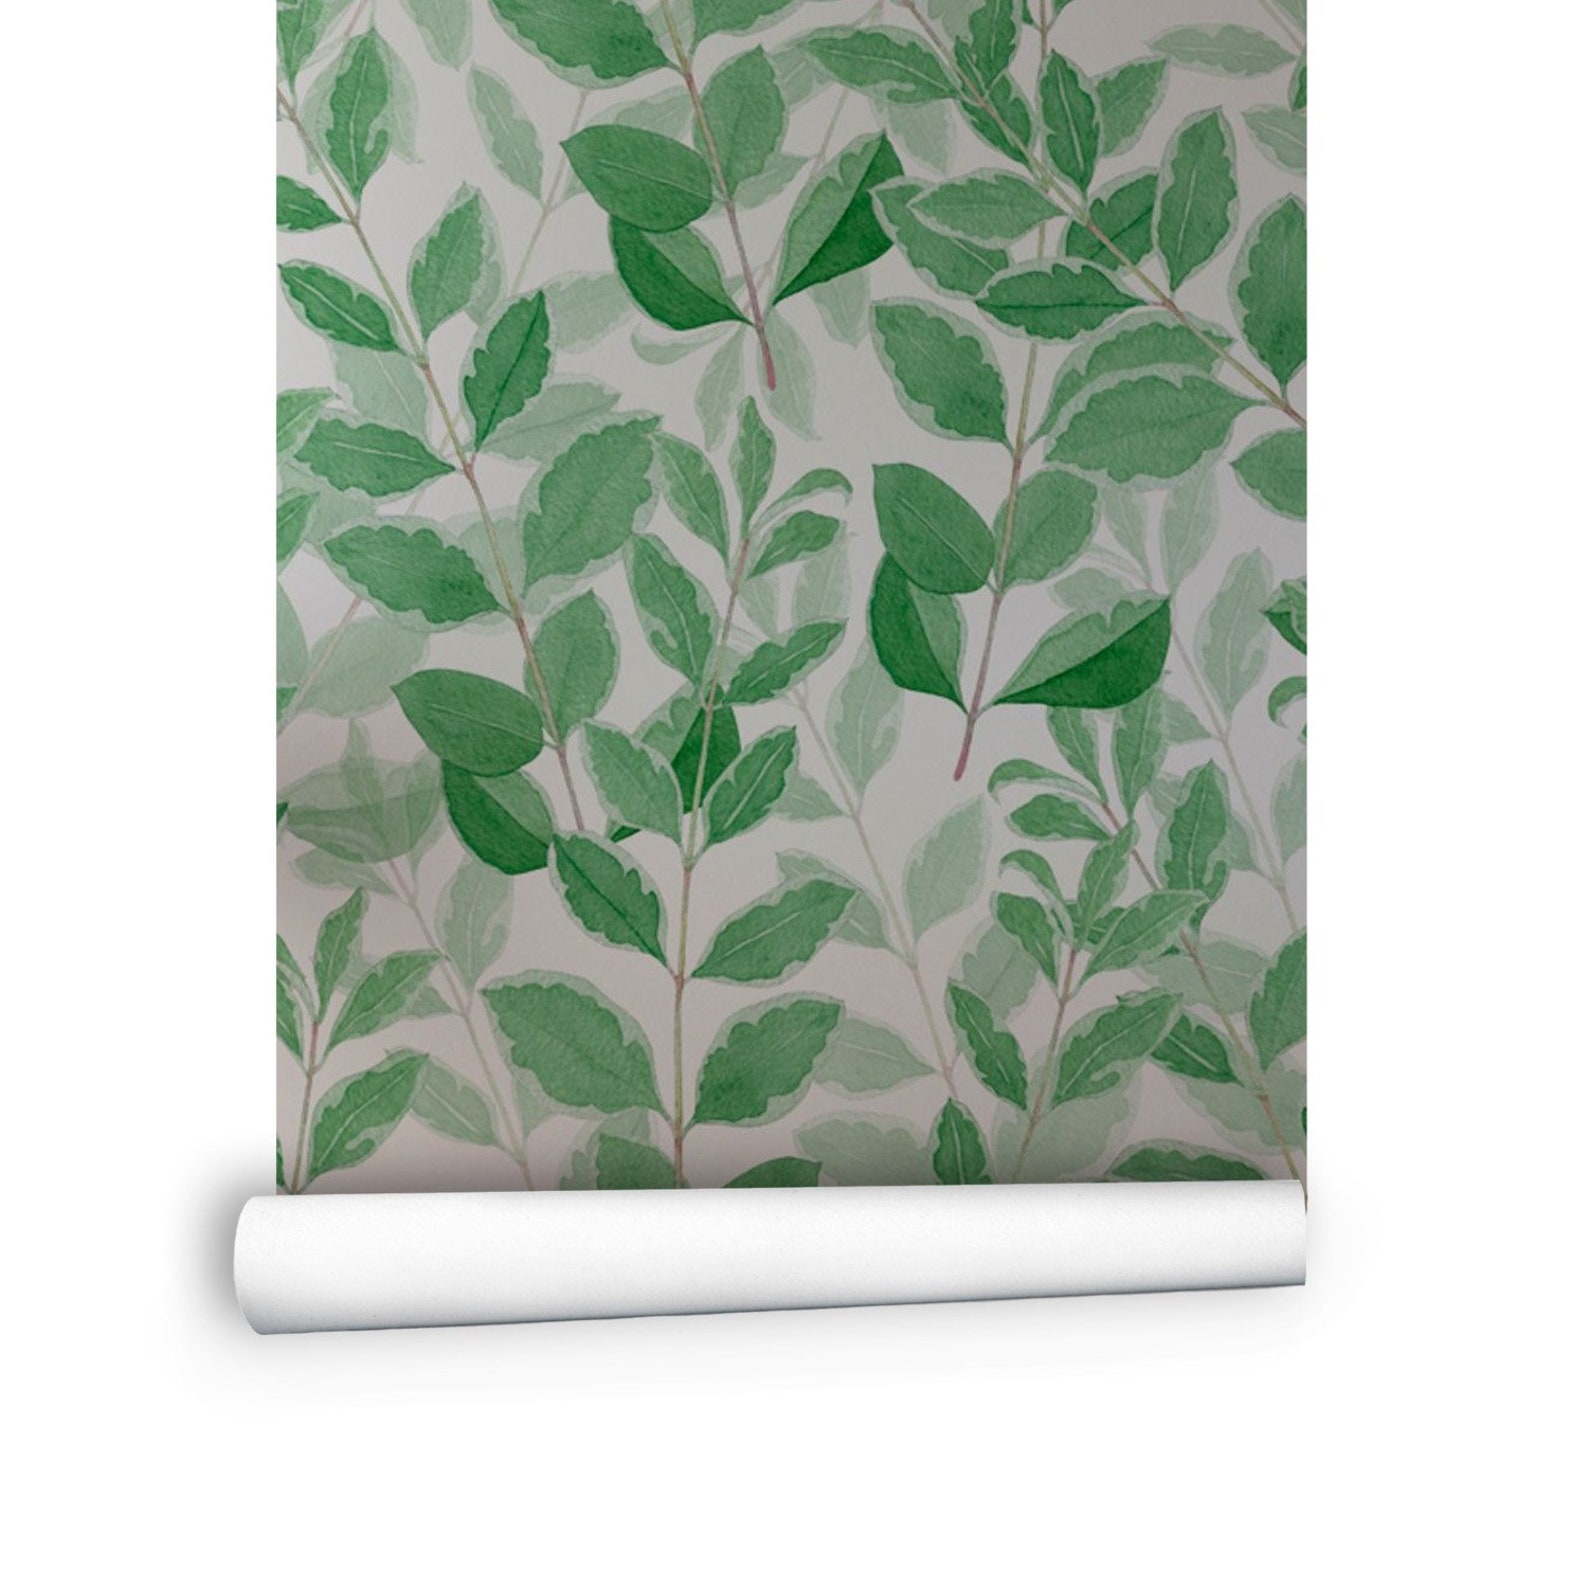 Green Leaf Self-Adhesive Wall Mural Floral Removable Peel | Etsy